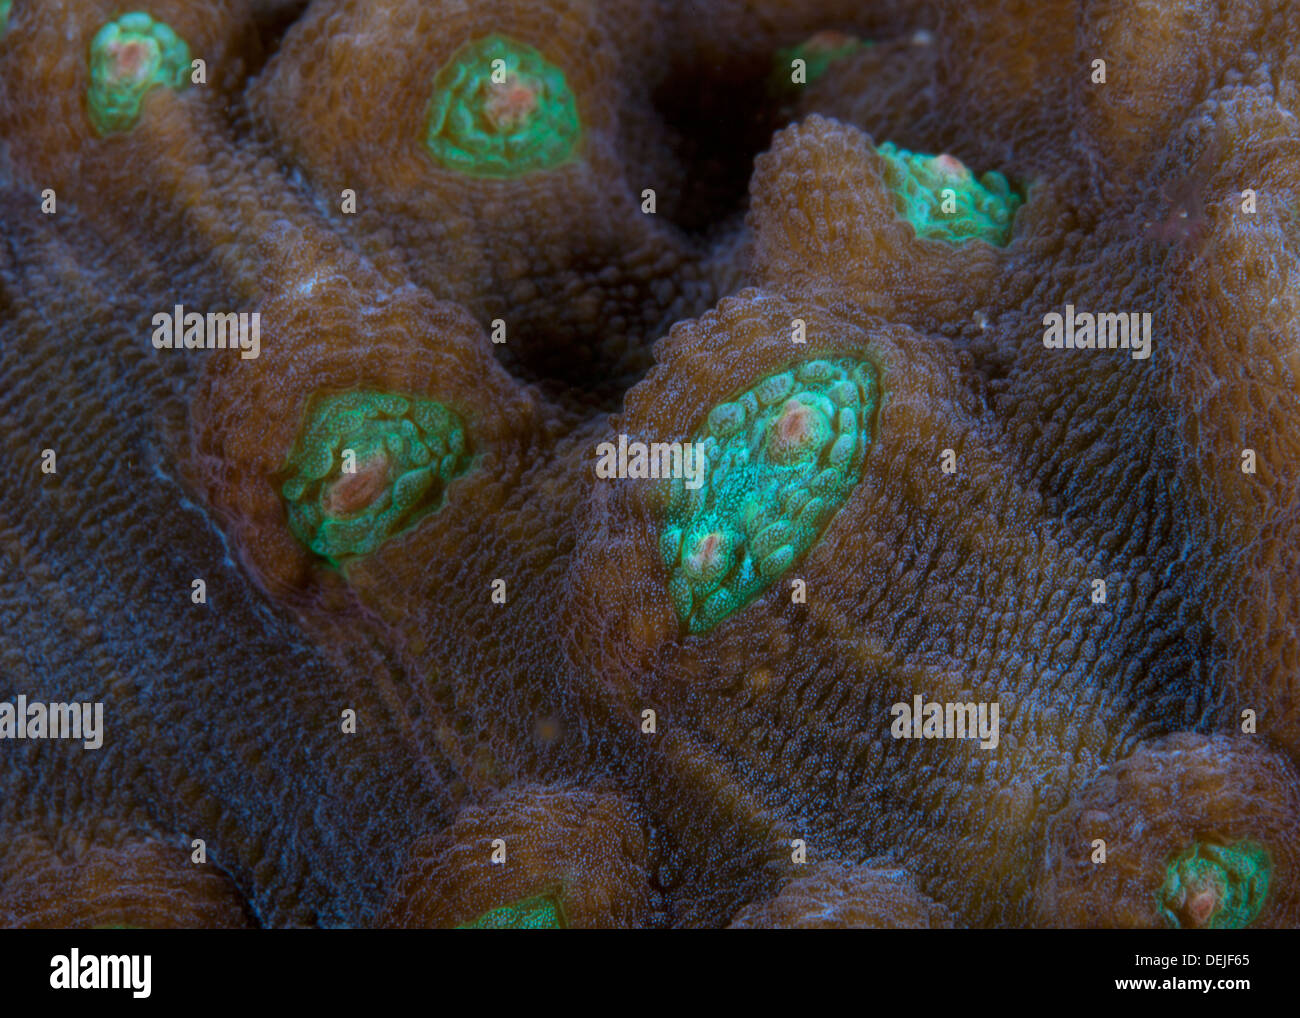 Detail image of hard coral polyp, Favia sp. Stock Photo